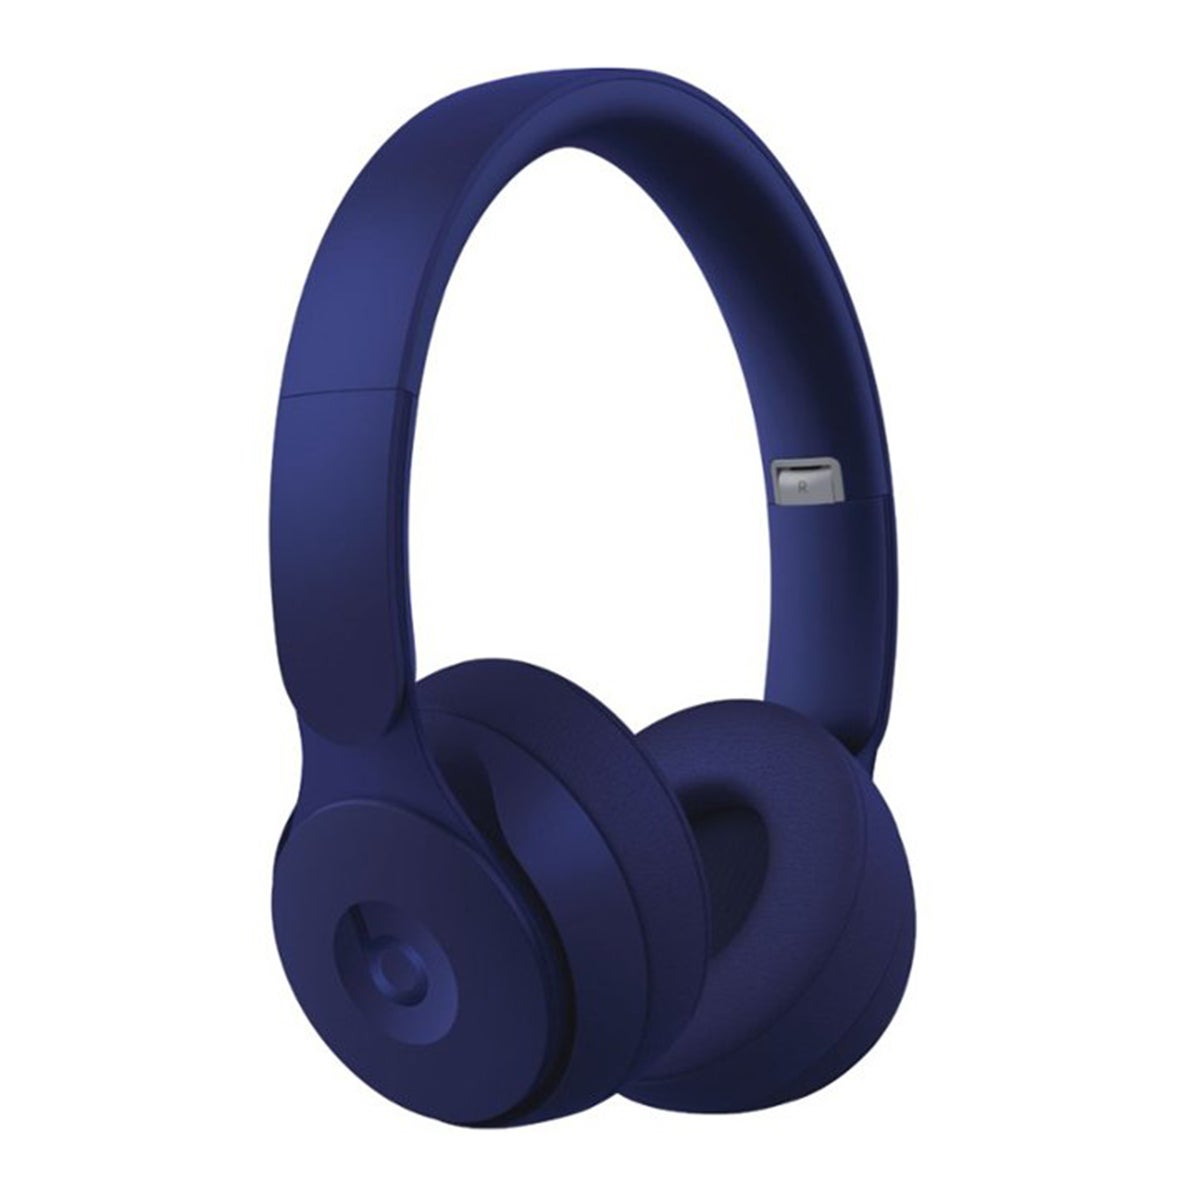 Beats by Dr. Dre Solo Pro More Matte Collection Wireless Noise Cancelling On-Ear Headphones